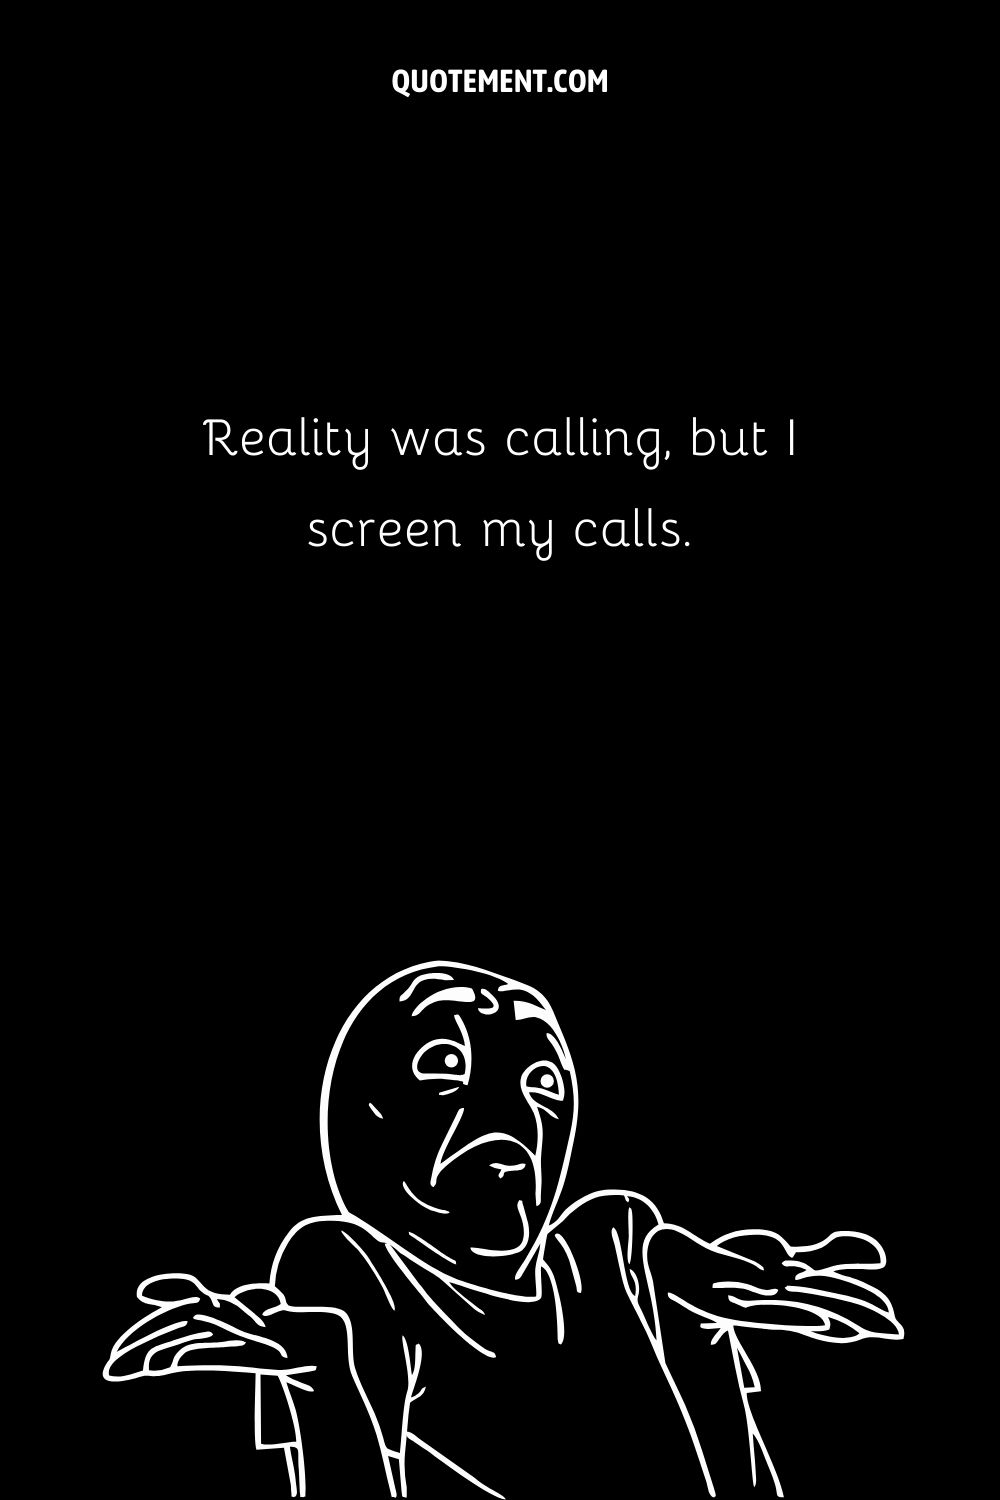 Reality was calling, but I screen my calls.